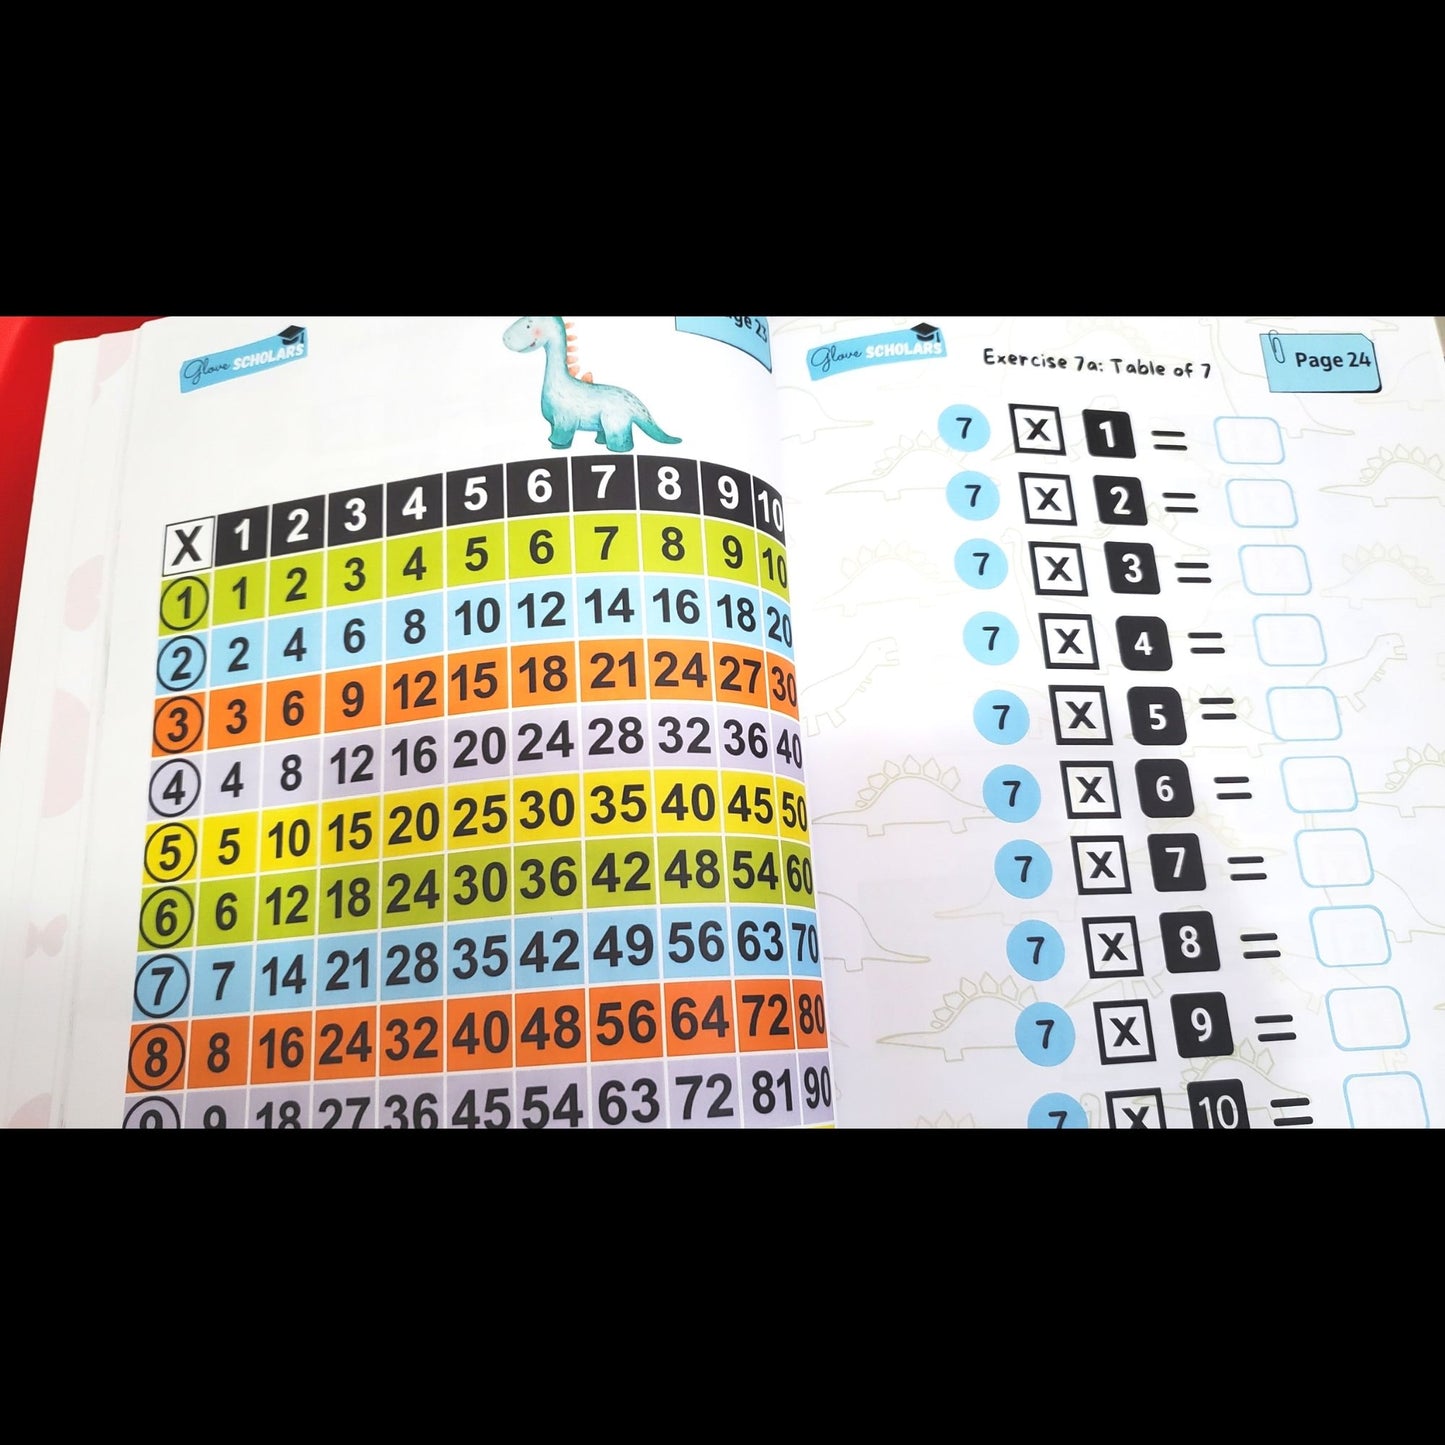 Multiplication Times Tables practice Book